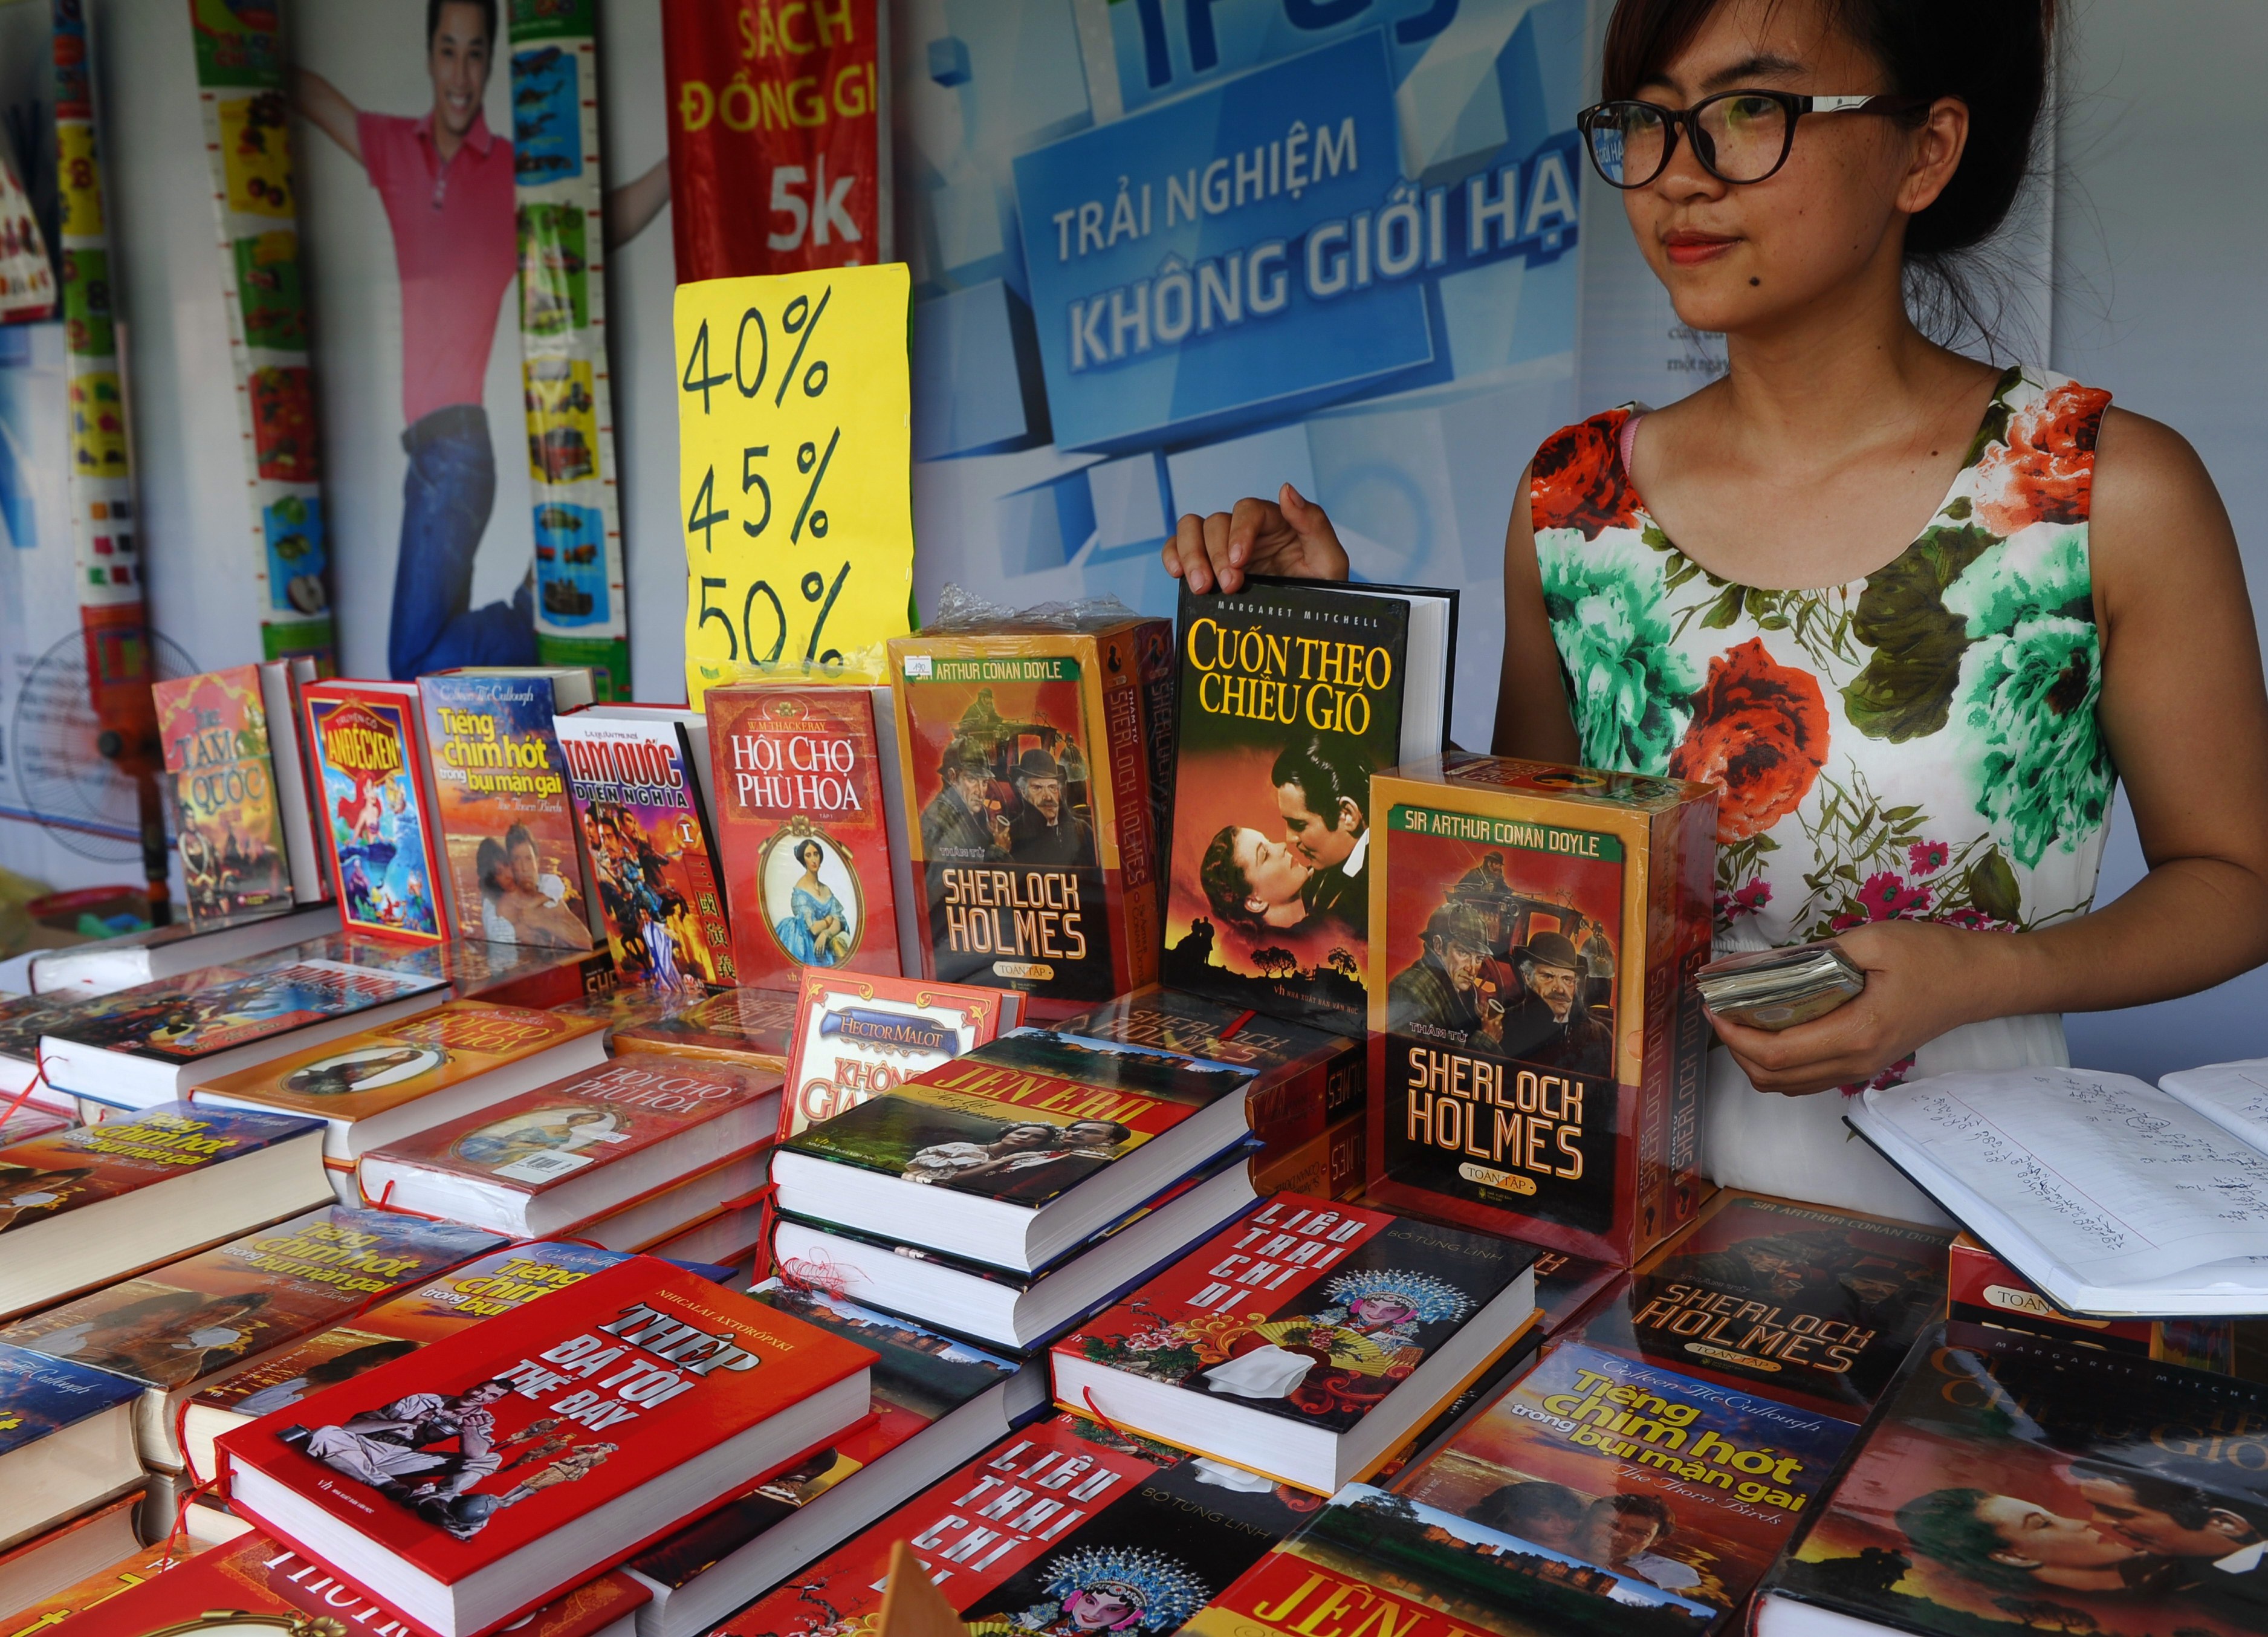 A publishing-house employee stands at a booth selling discount foreign novels at a book festival in Hanoi on Sept. 30, 2014 (Hoang Dinh Nam—AFP/Getty Images)